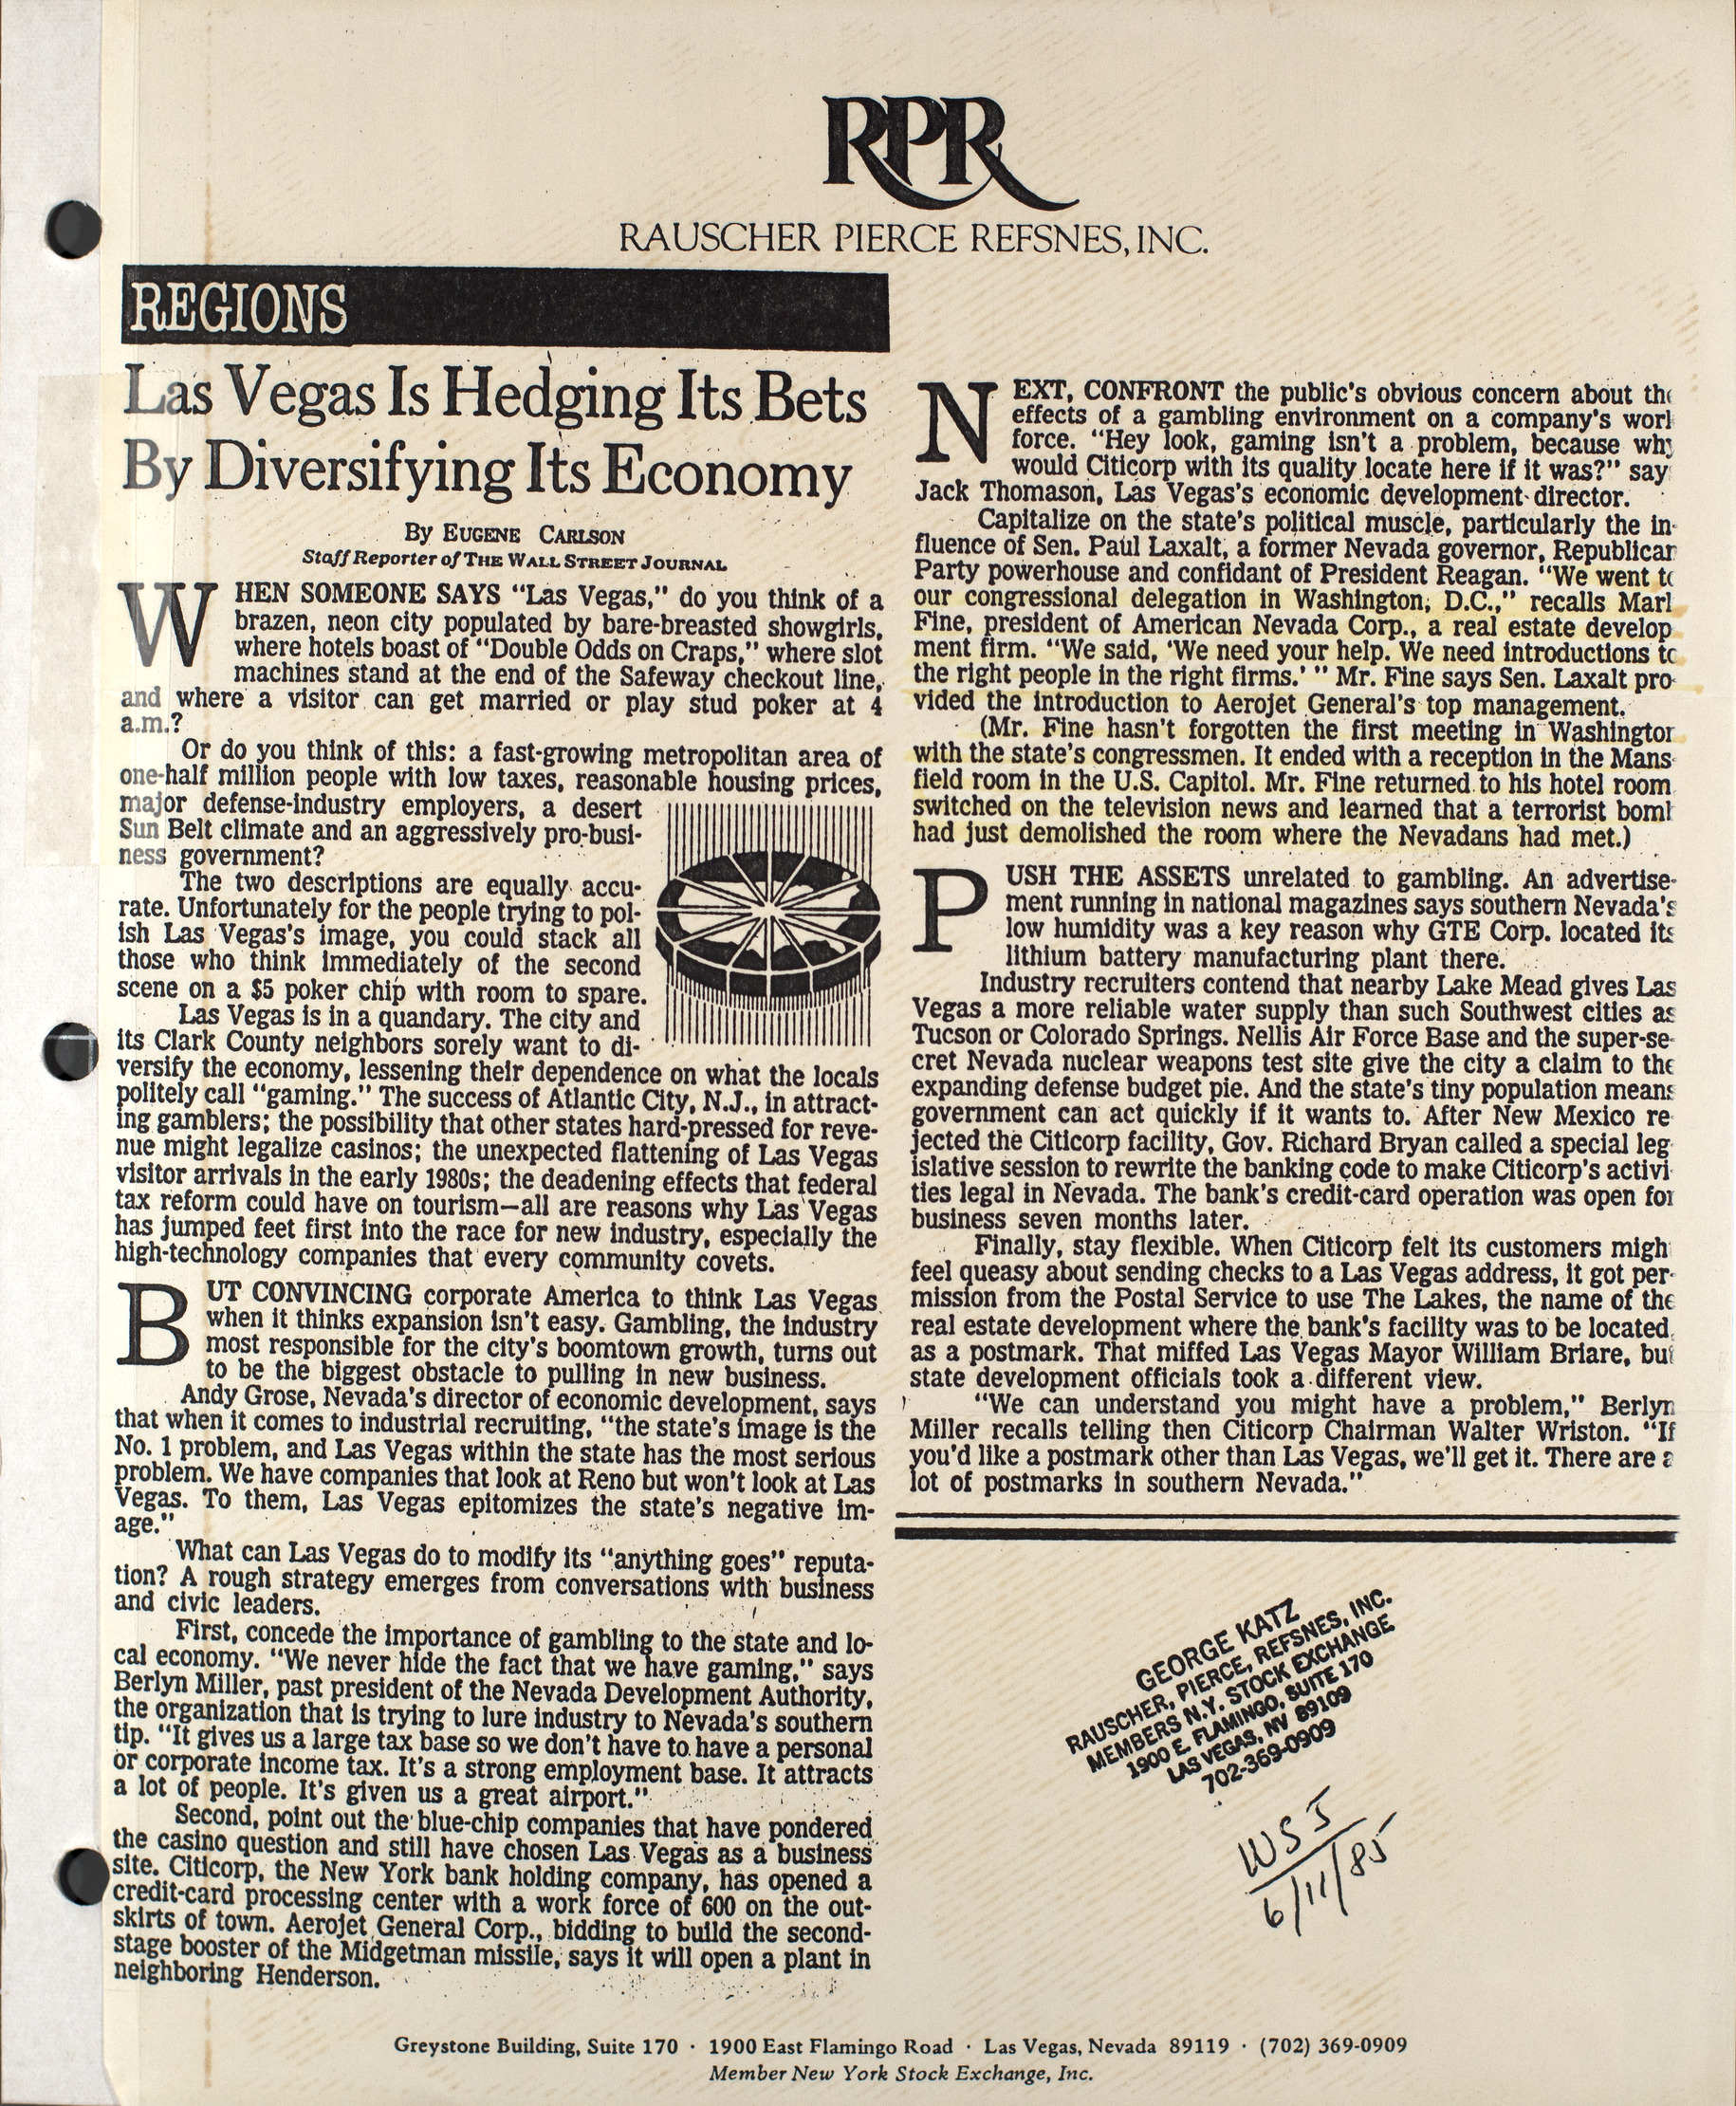 Clipping, Las Vegas is hedging its bets by diversifying its economy, Wall Street Journal, June 11, 1985